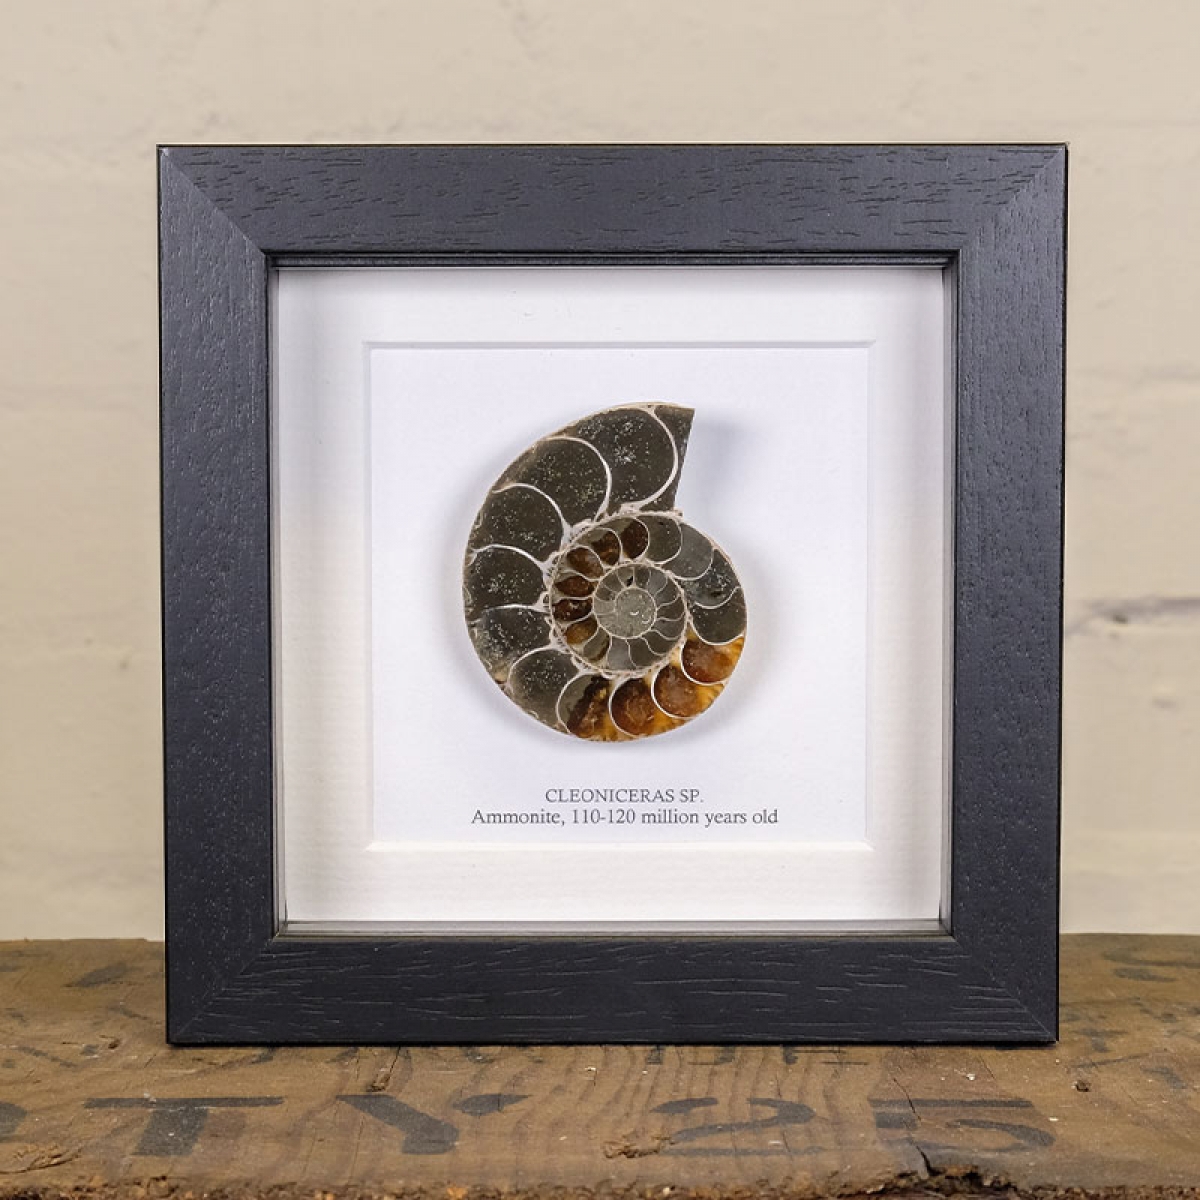 Minibeast Ammonite Cut and Polished Fossil in Box Frame (Cleoniceras sp) - Specimen #11